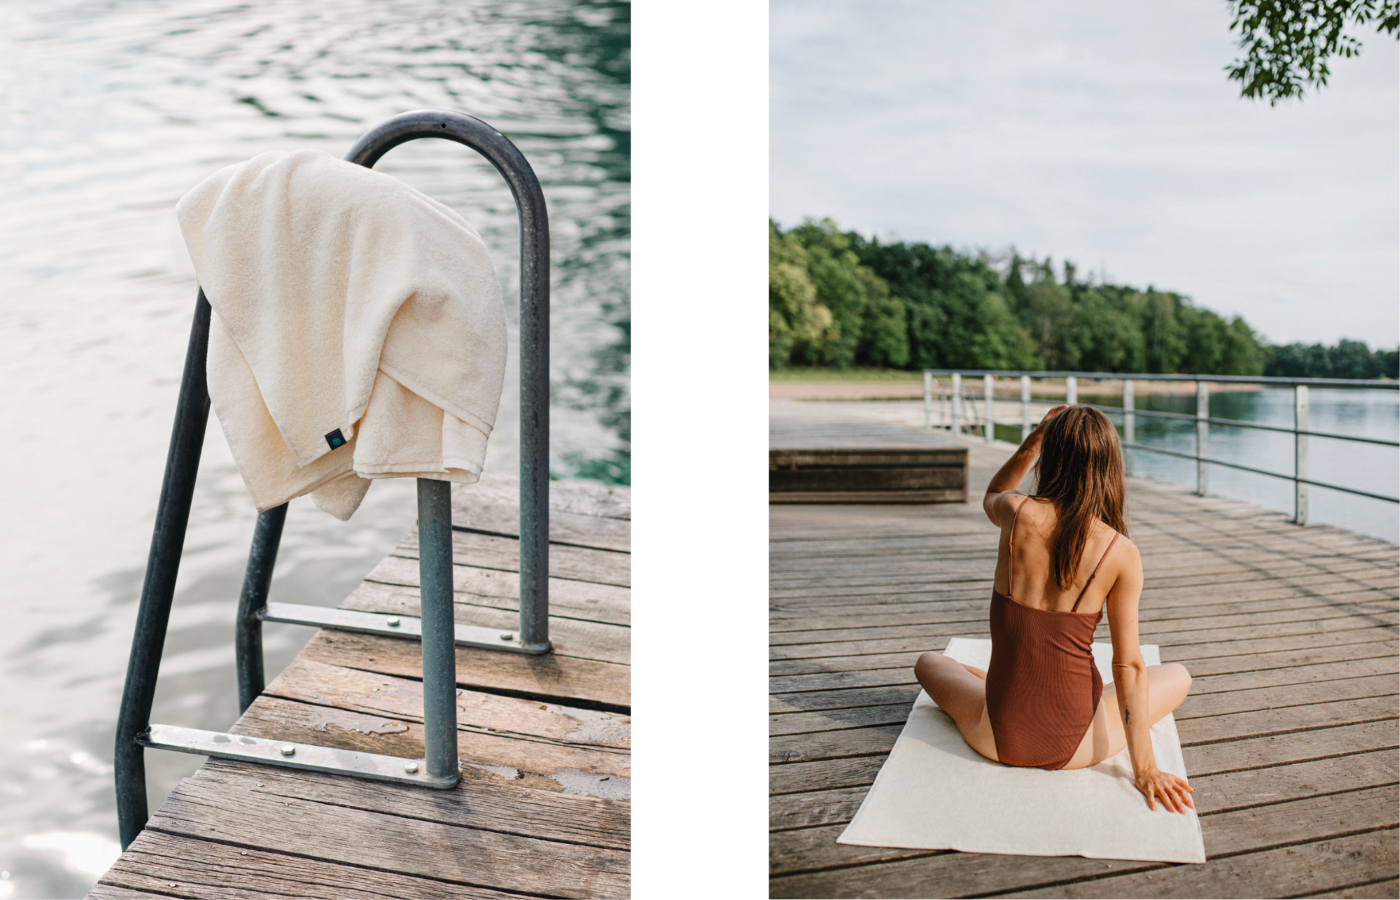 Our soft beach towel is a summer essential.